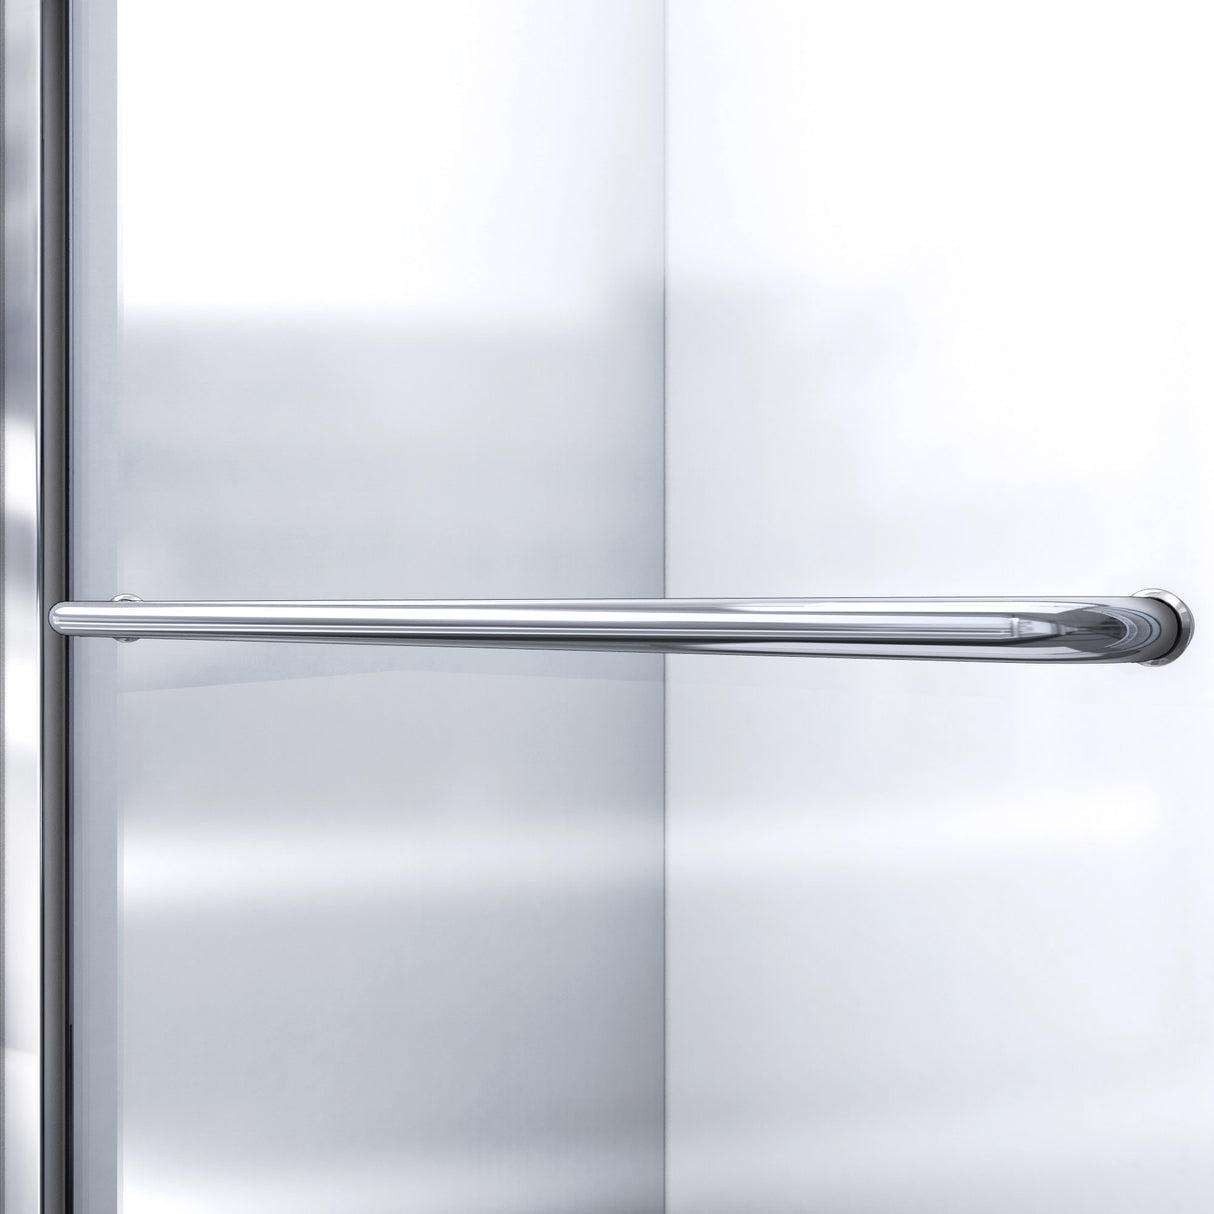 DreamLine Infinity-Z 30 in. D x 60 in. W x 78 3/4 in. H Sliding Shower Door, Base, and White Wall Kit in Brushed Nickel and Clear Glass